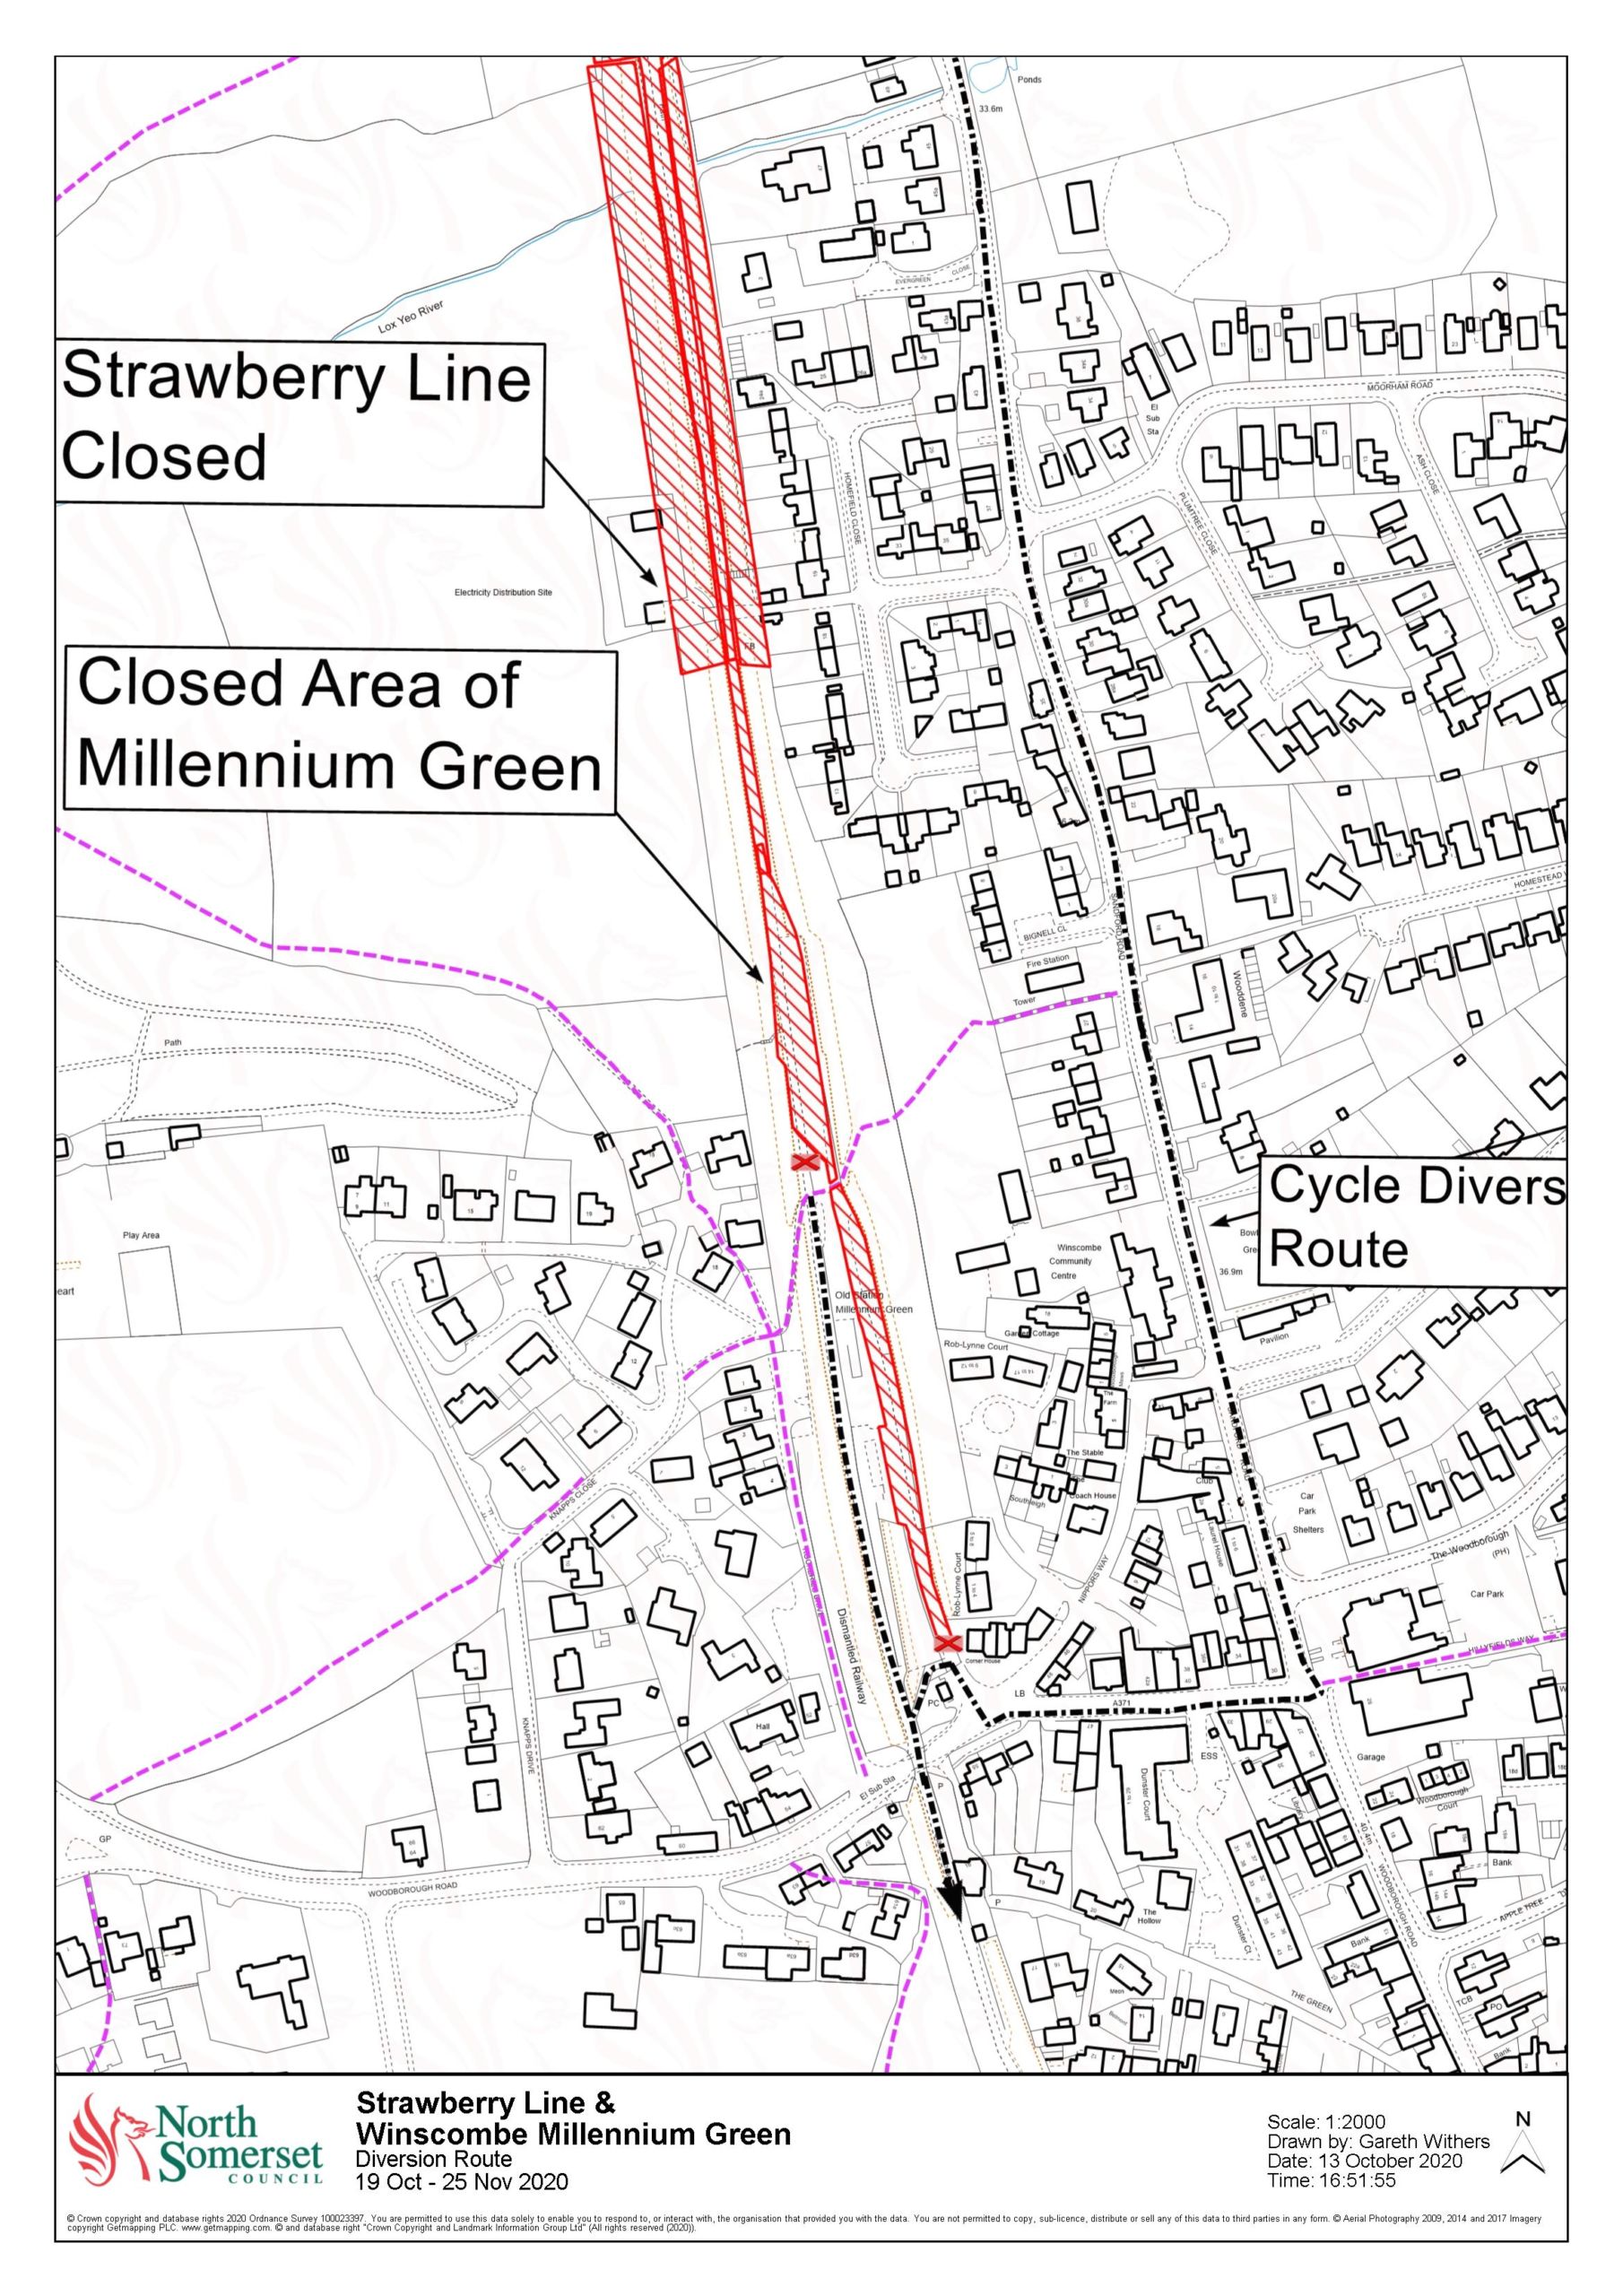 Map showing Strawberry Line walking and cycling closures around Millennium Green